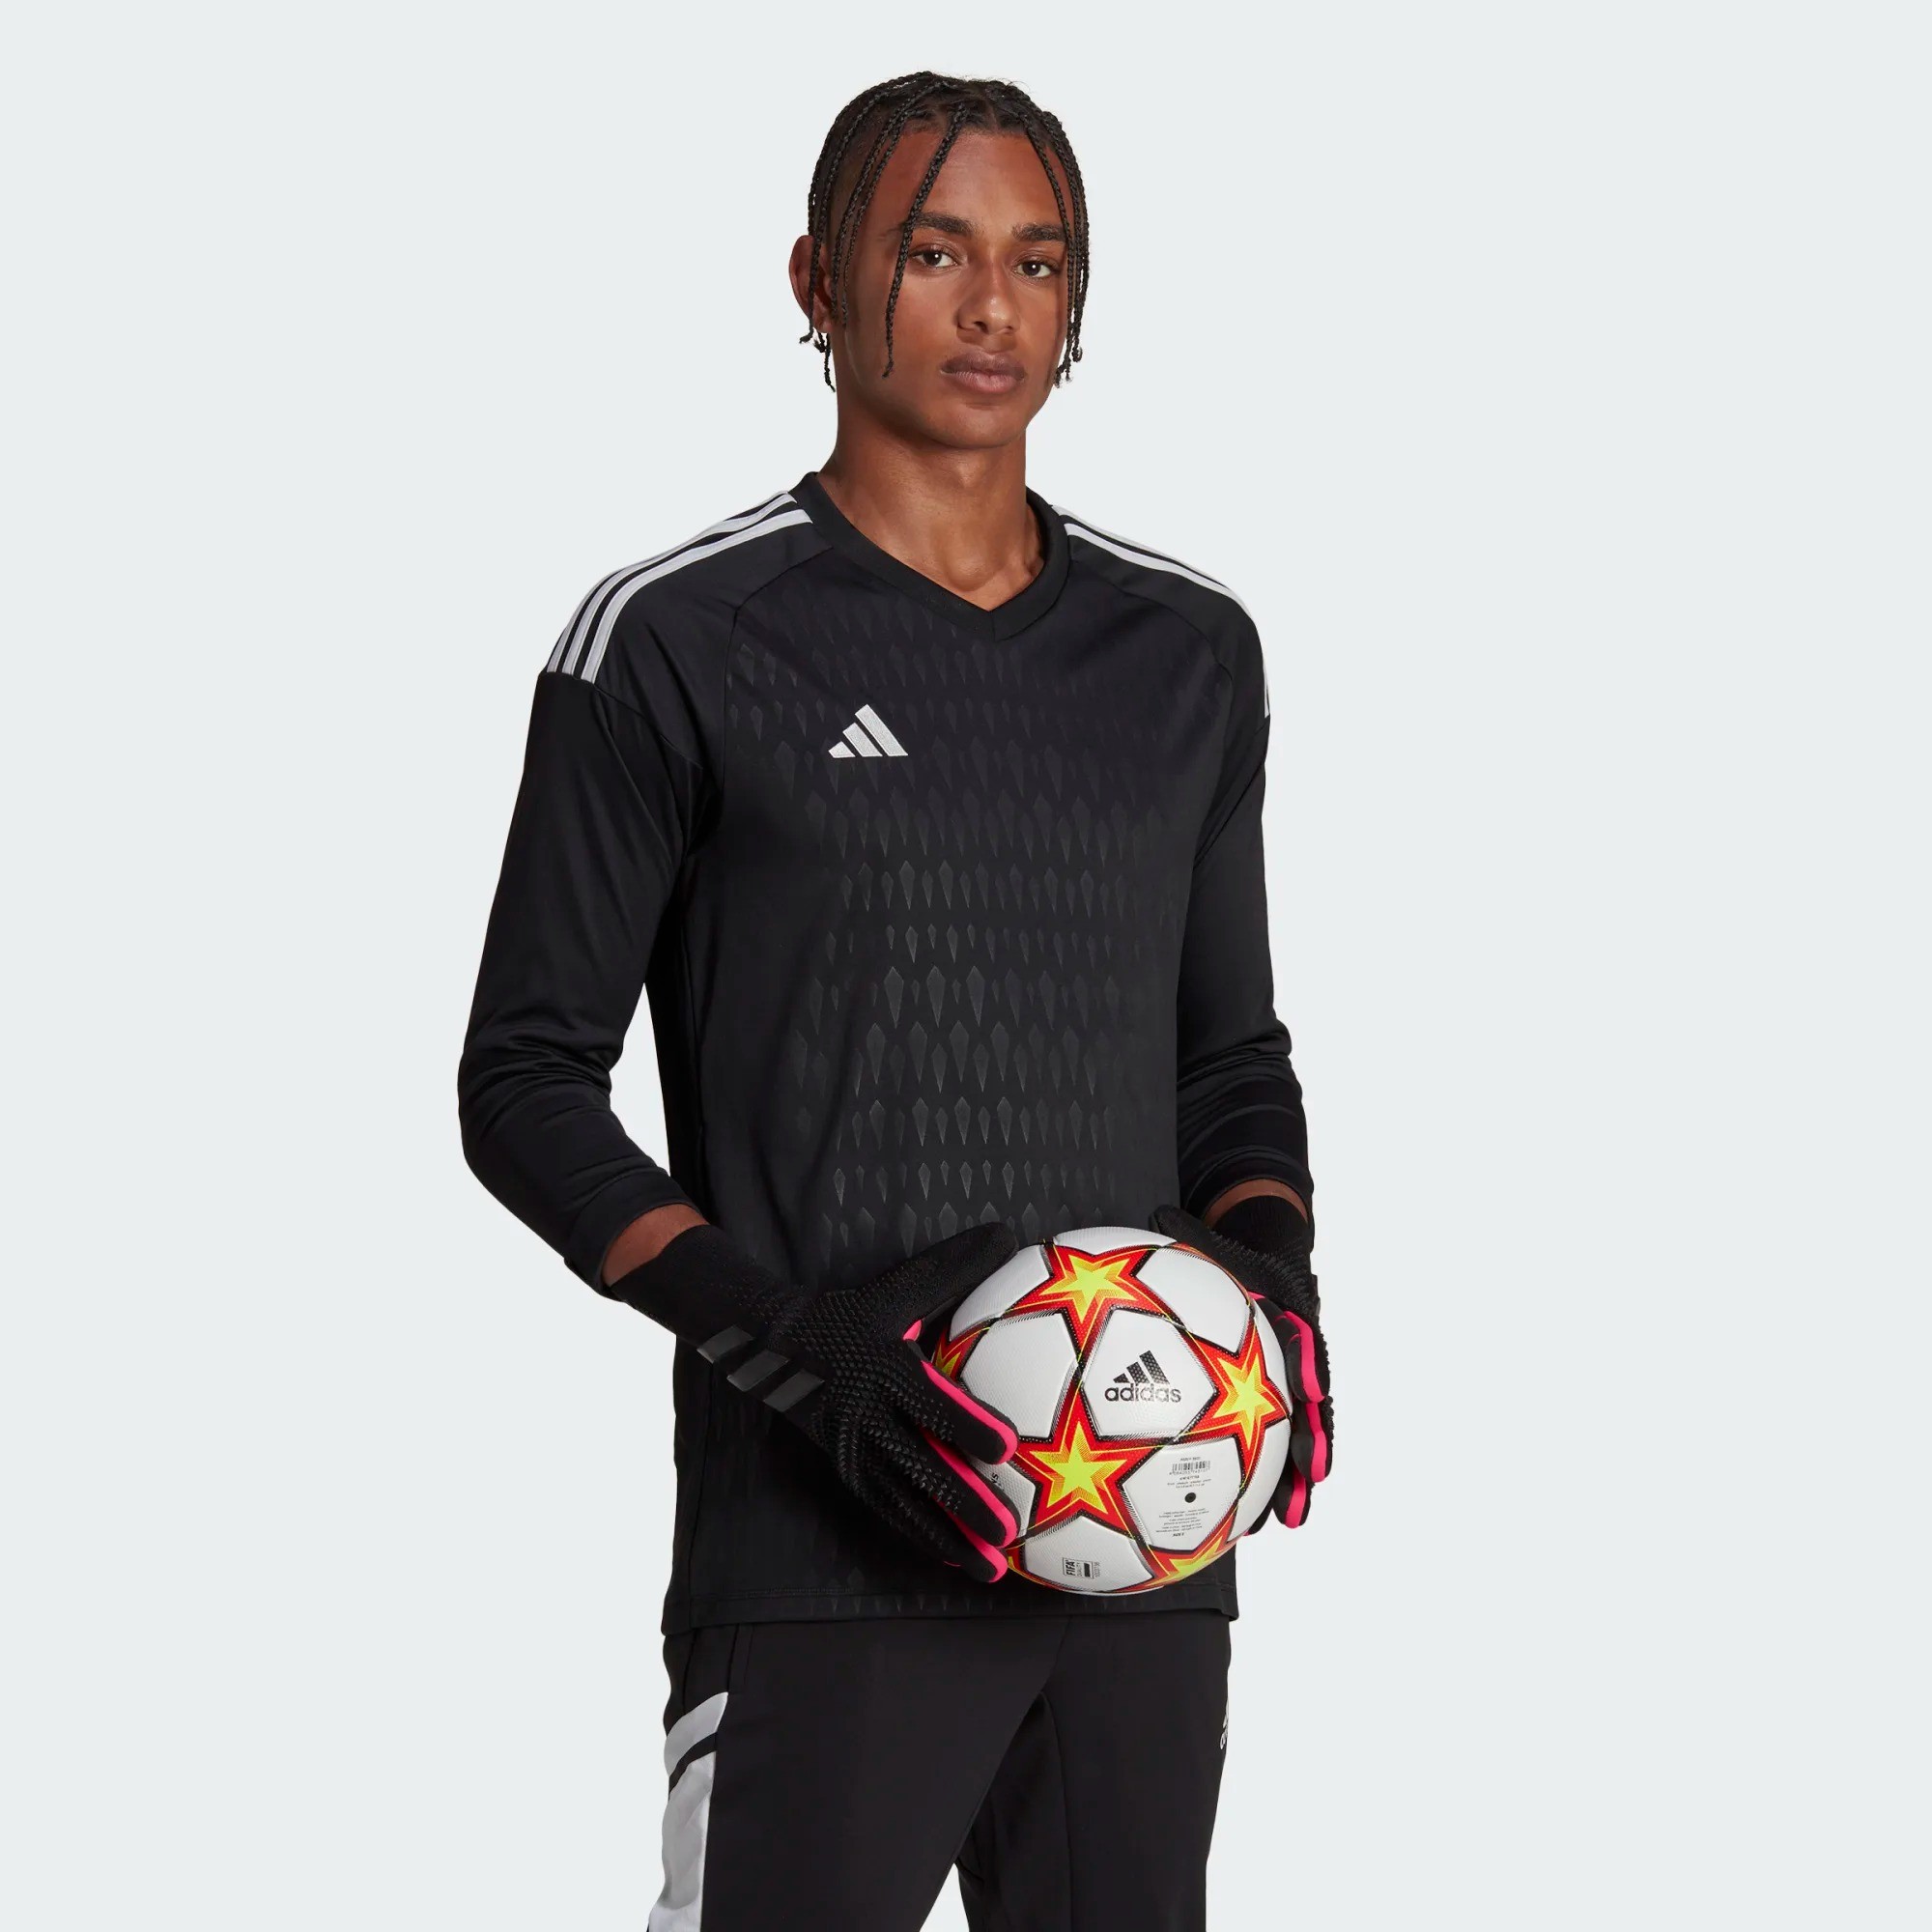 ADIDAS T23 COMPETITION GK JERSEY LS BLACK